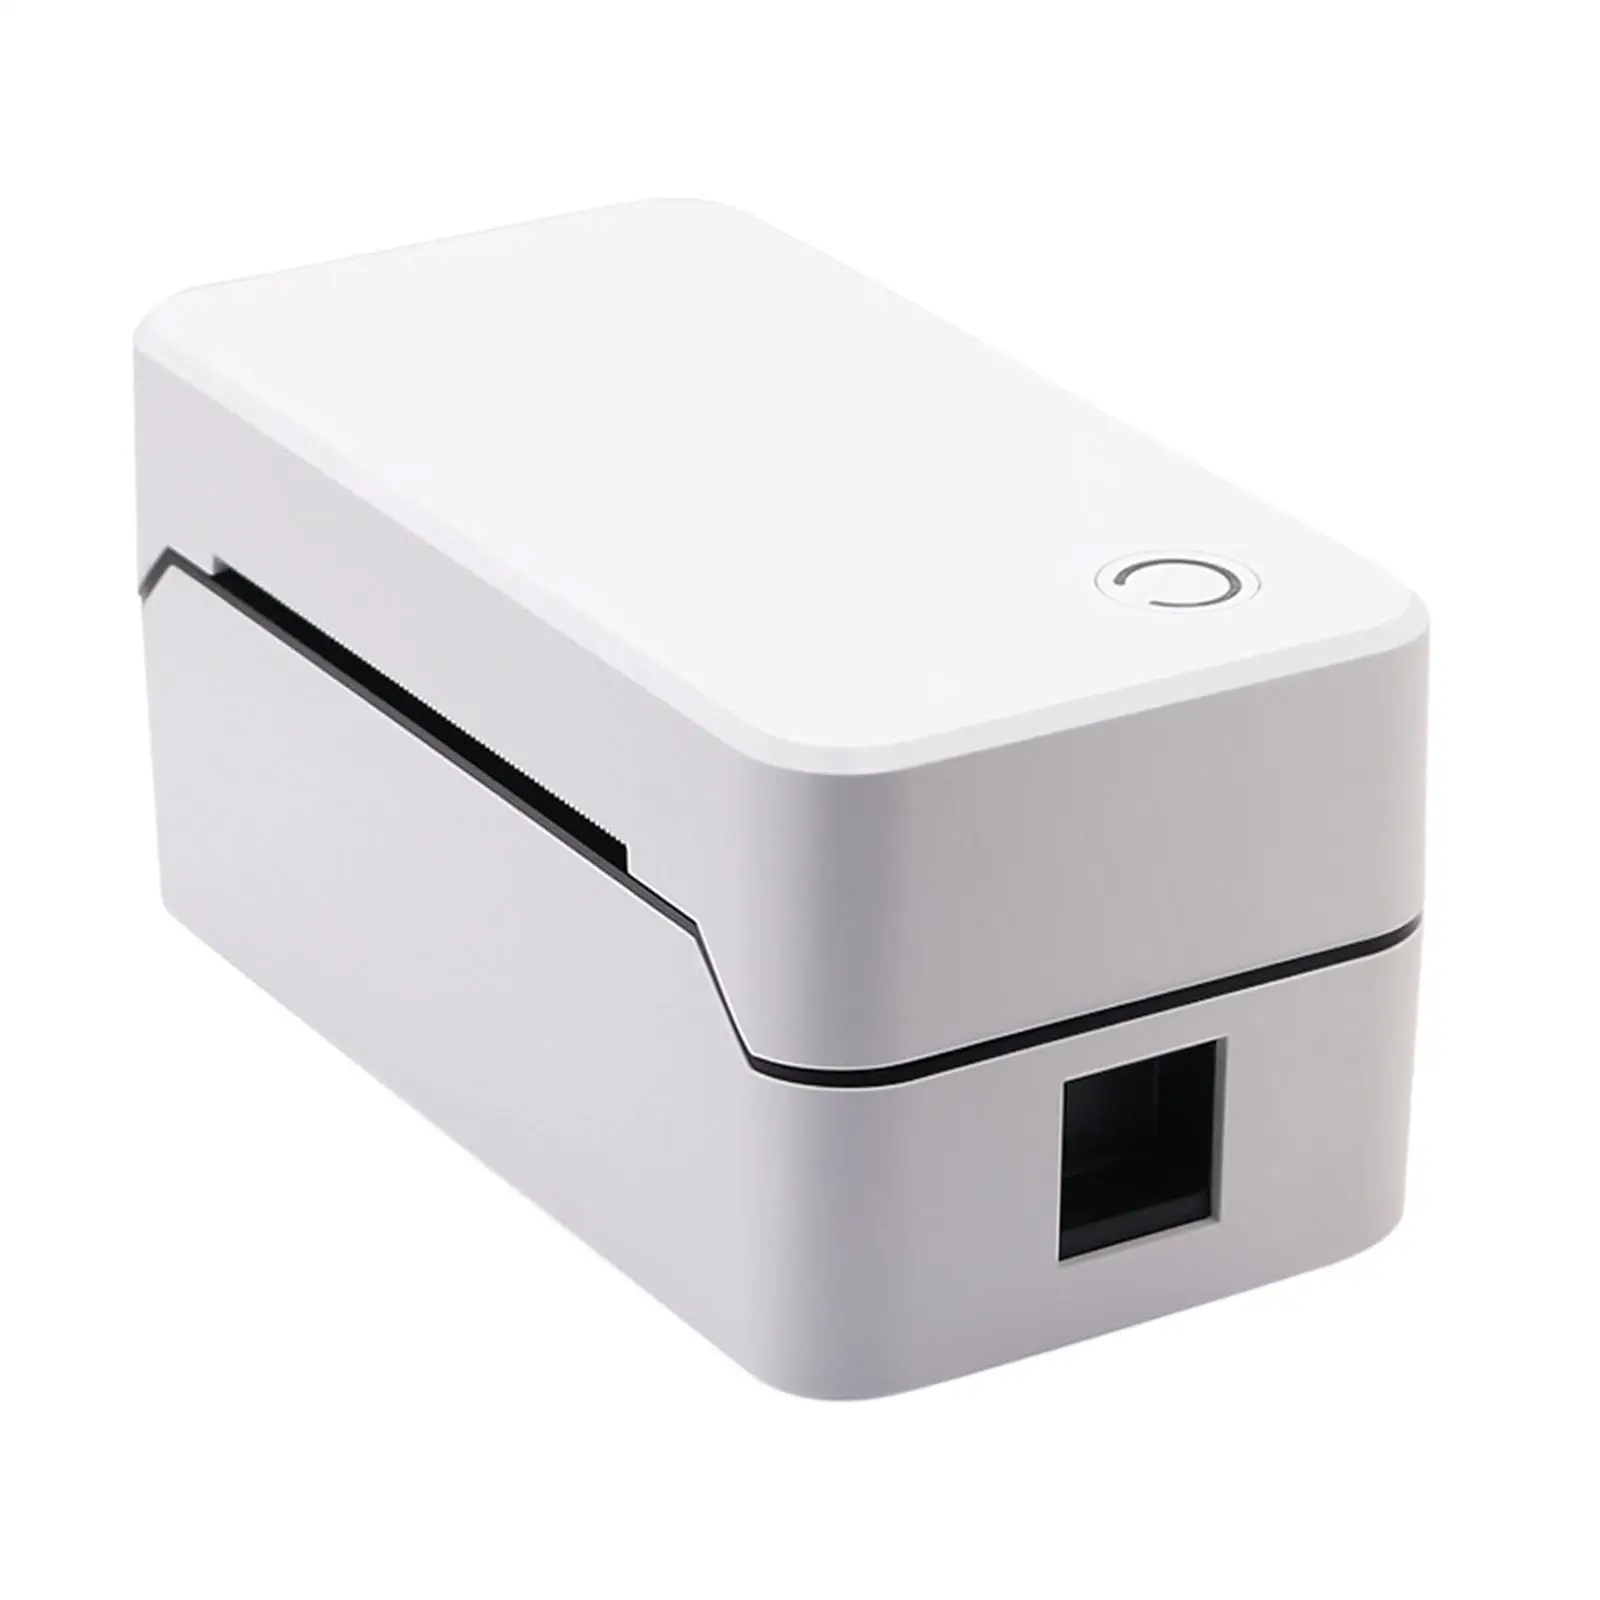 Direct Thermal with Cutter Clear Printing Wireless Sticker Maker Label Label Printer for Home Office ID Mailing USB Rechargeable